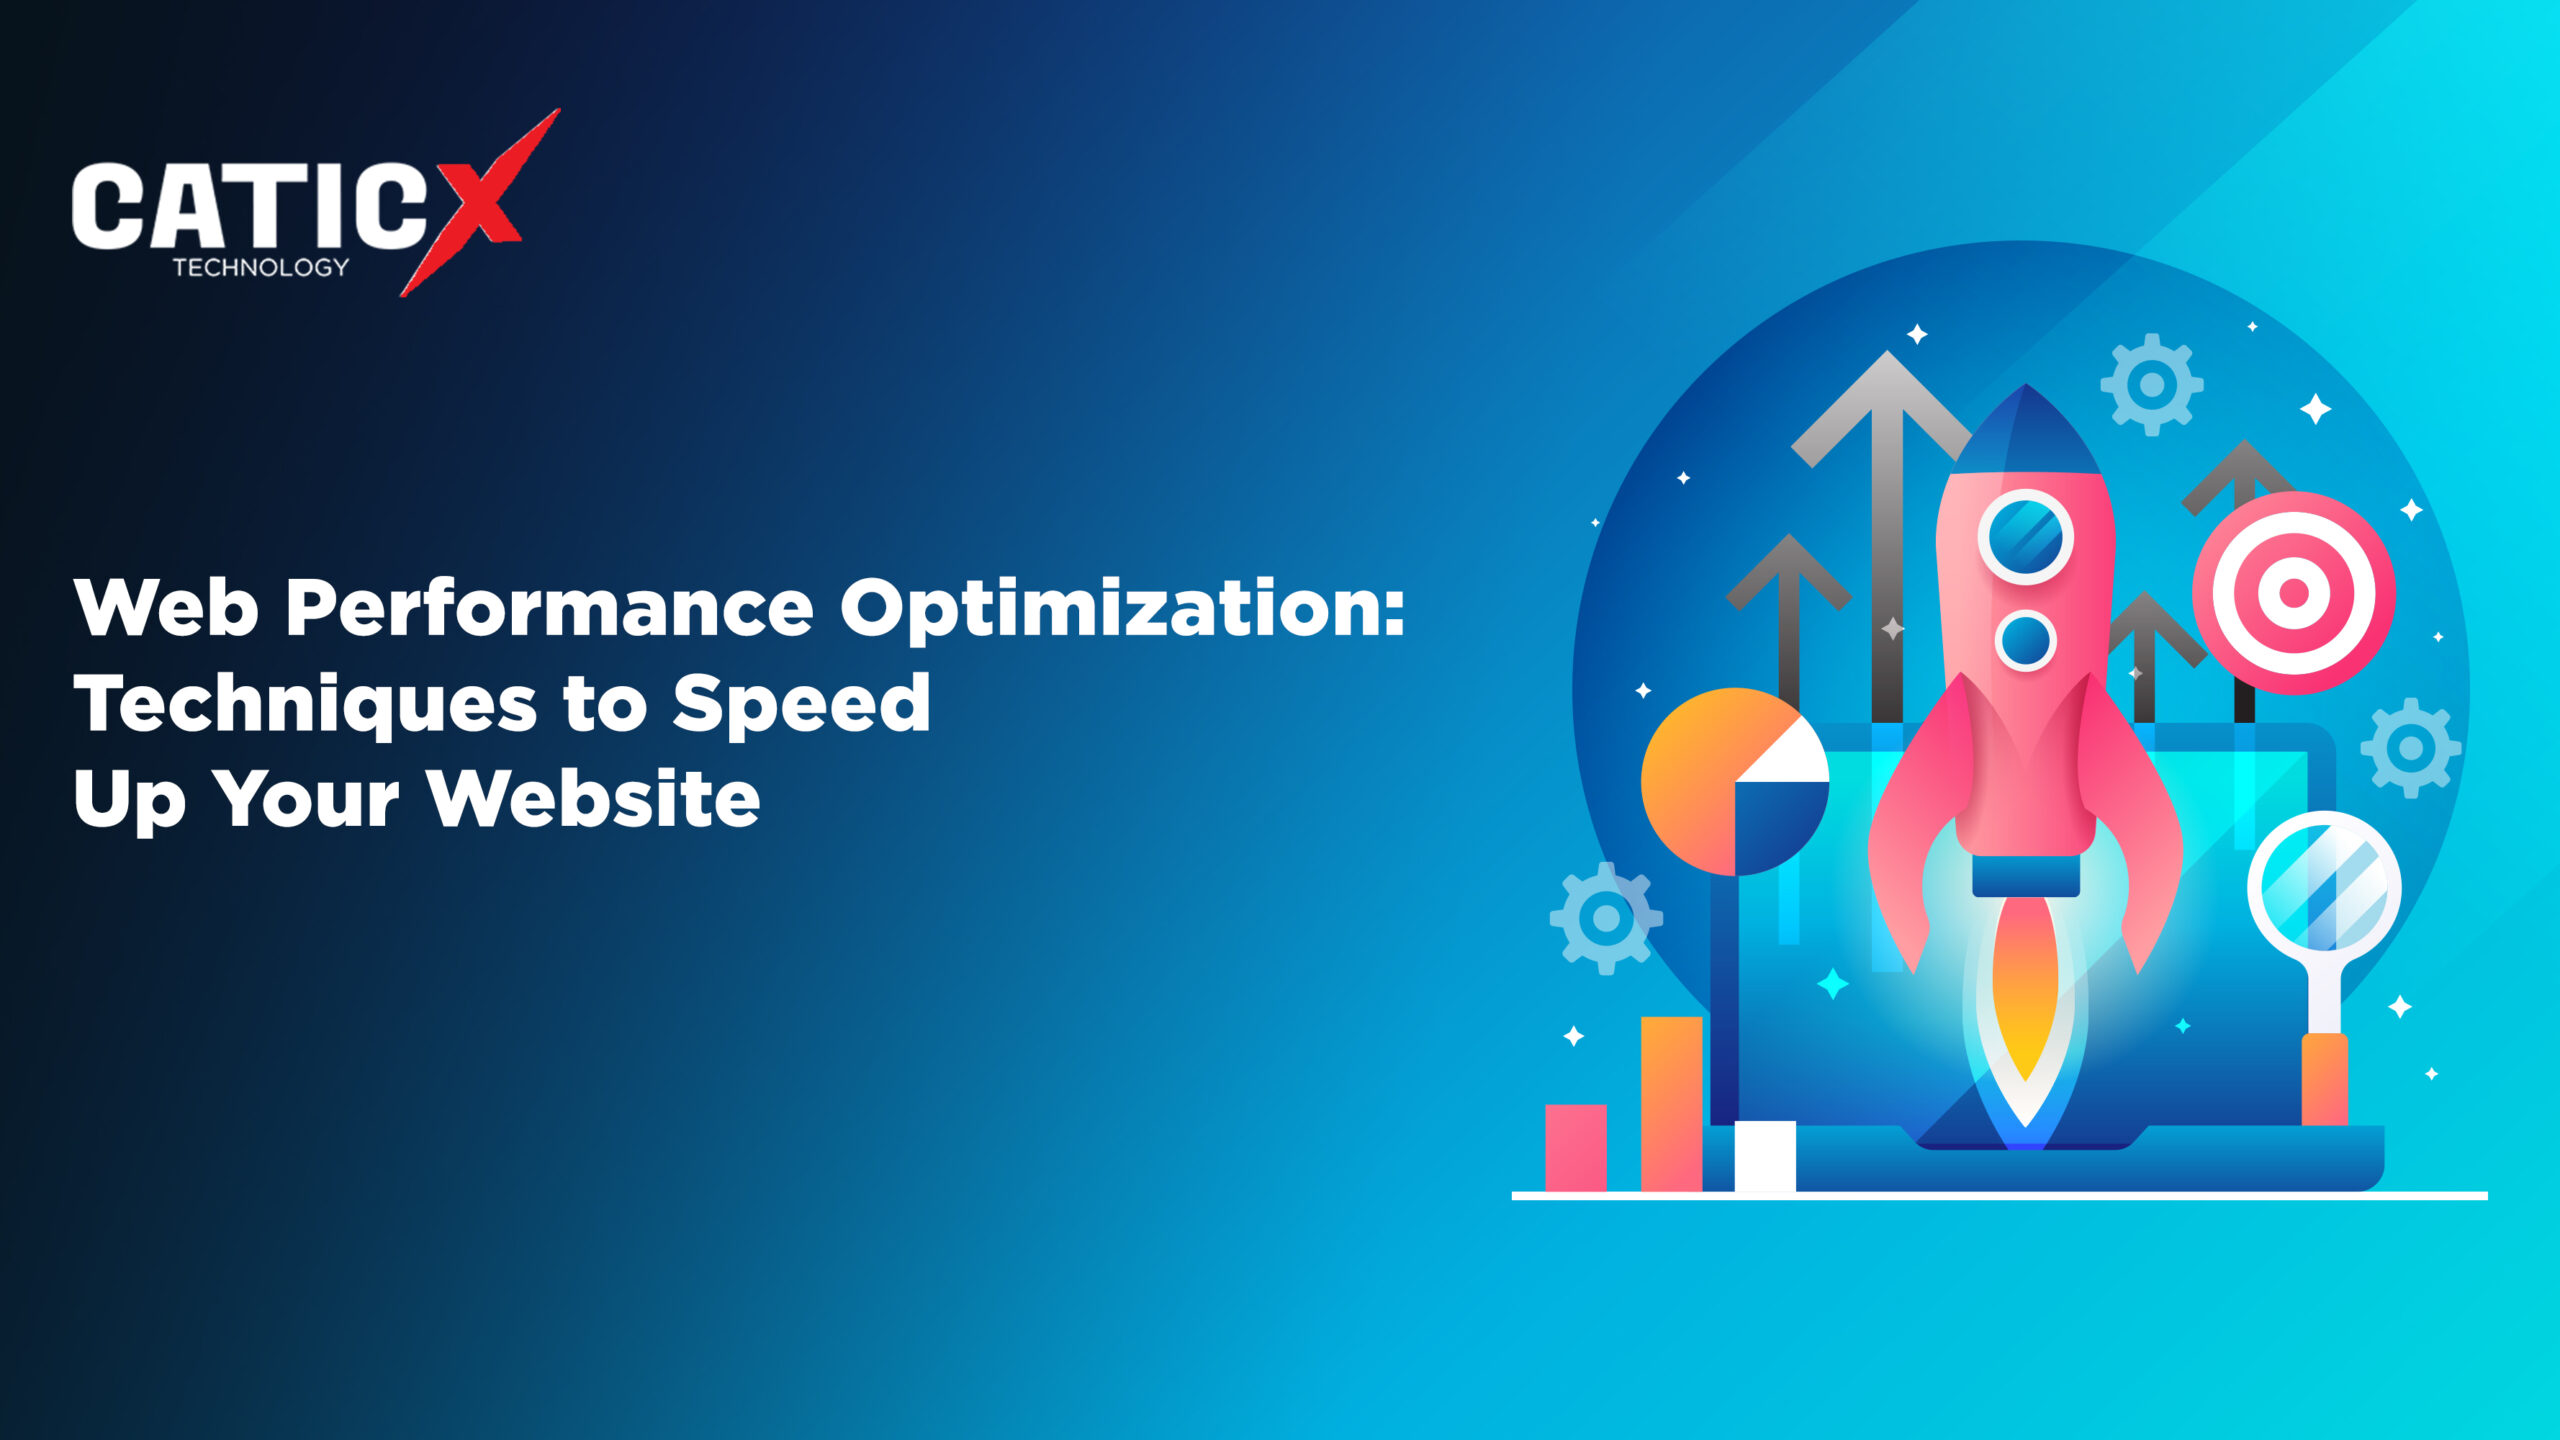 Web Performance Optimization Techniques to Speed Up Your Website